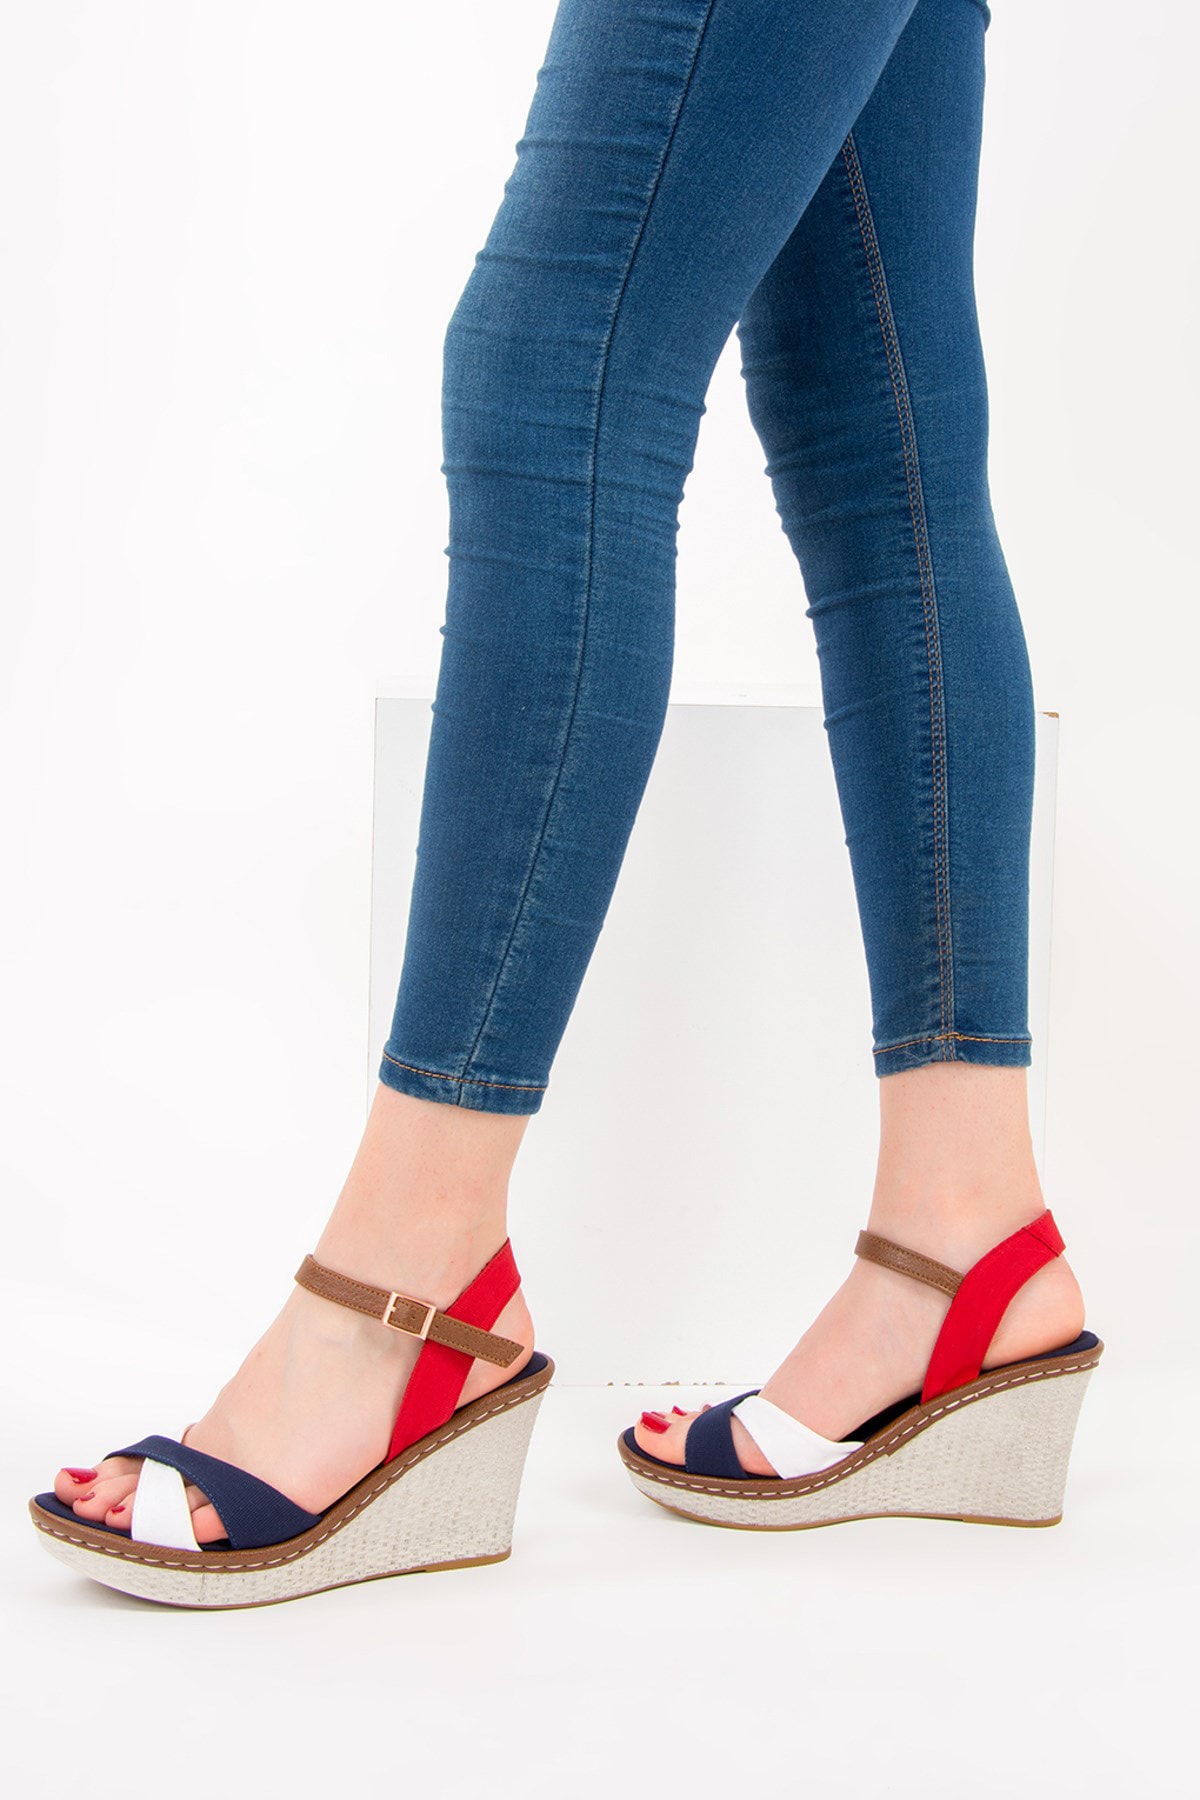 Levně Fox Shoes Navy Blue White Red Women's Wedge Heels Shoes